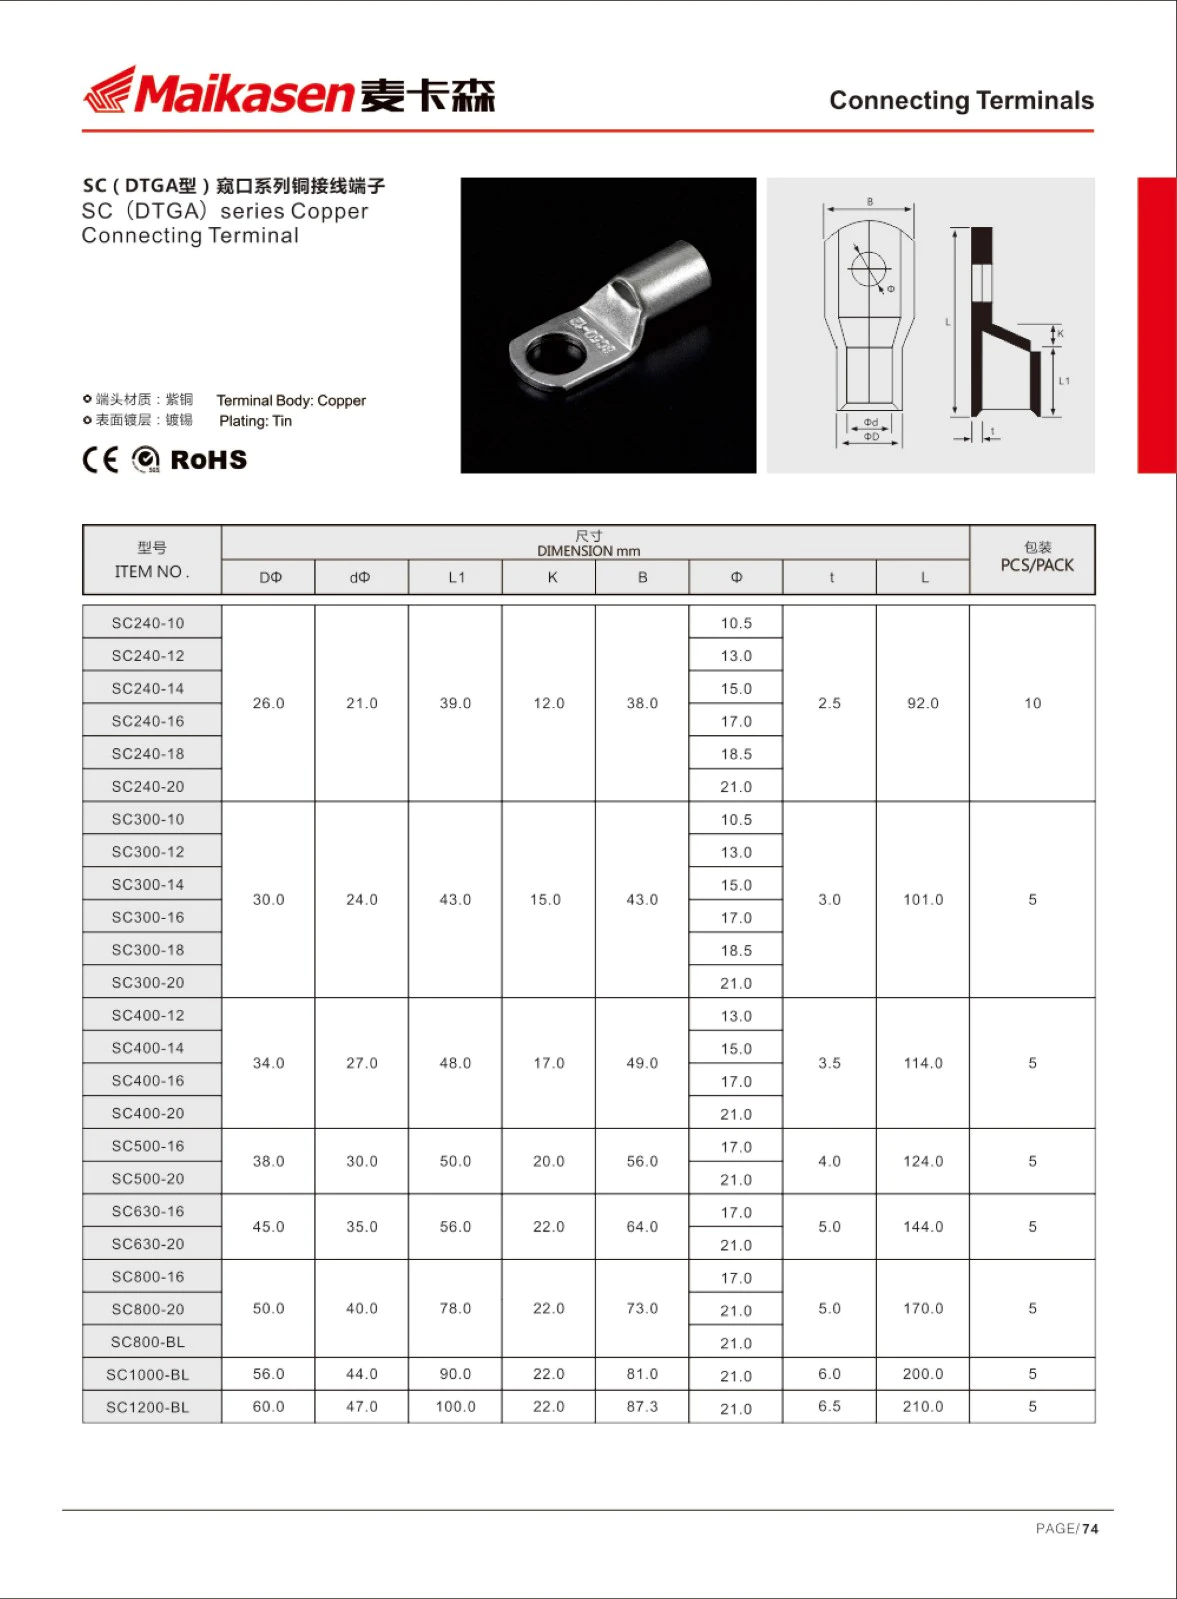 MKS stable terminal connector directly sale for instrument